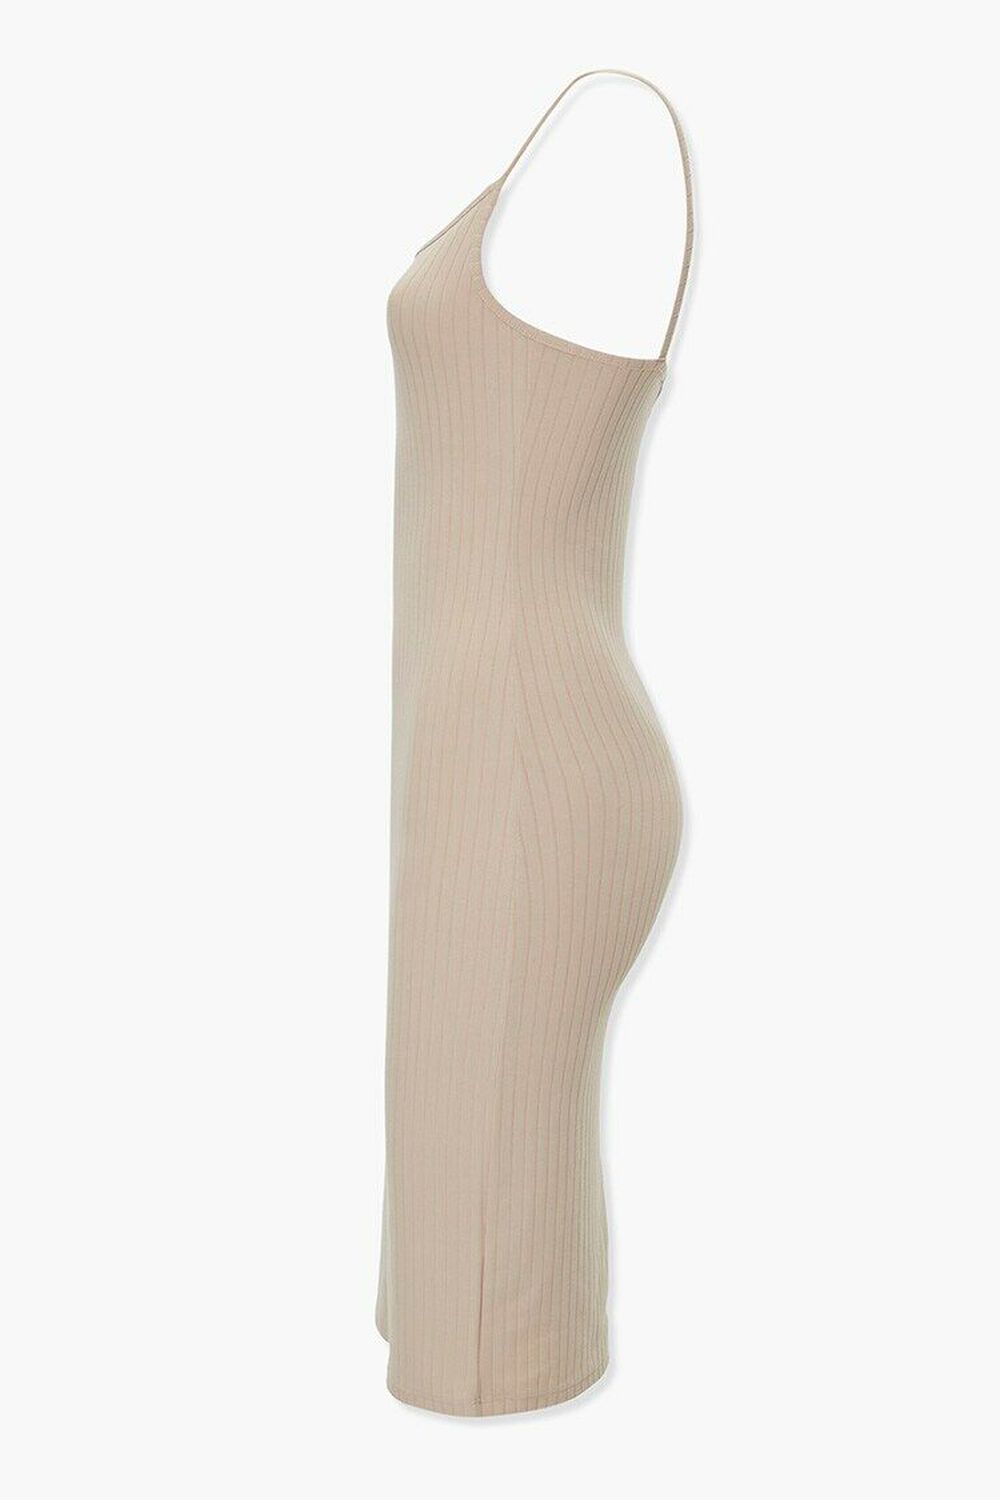 TAUPE Ribbed Bodycon Dress, image 2